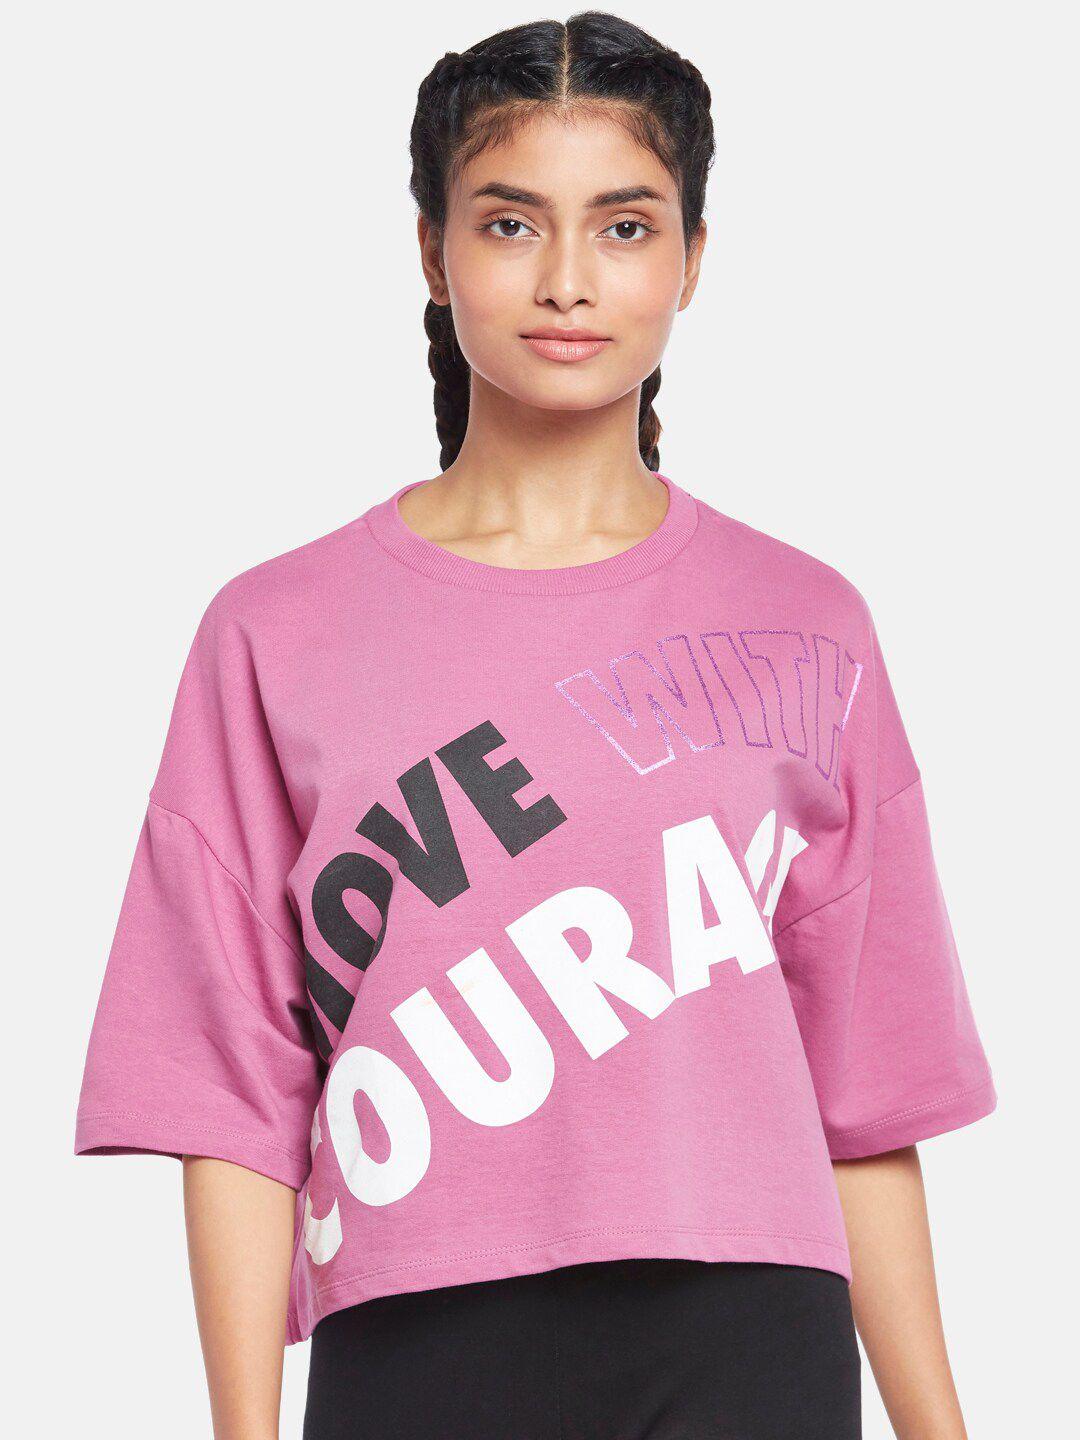 ajile by pantaloons women pink typography print extended sleeves boxy top